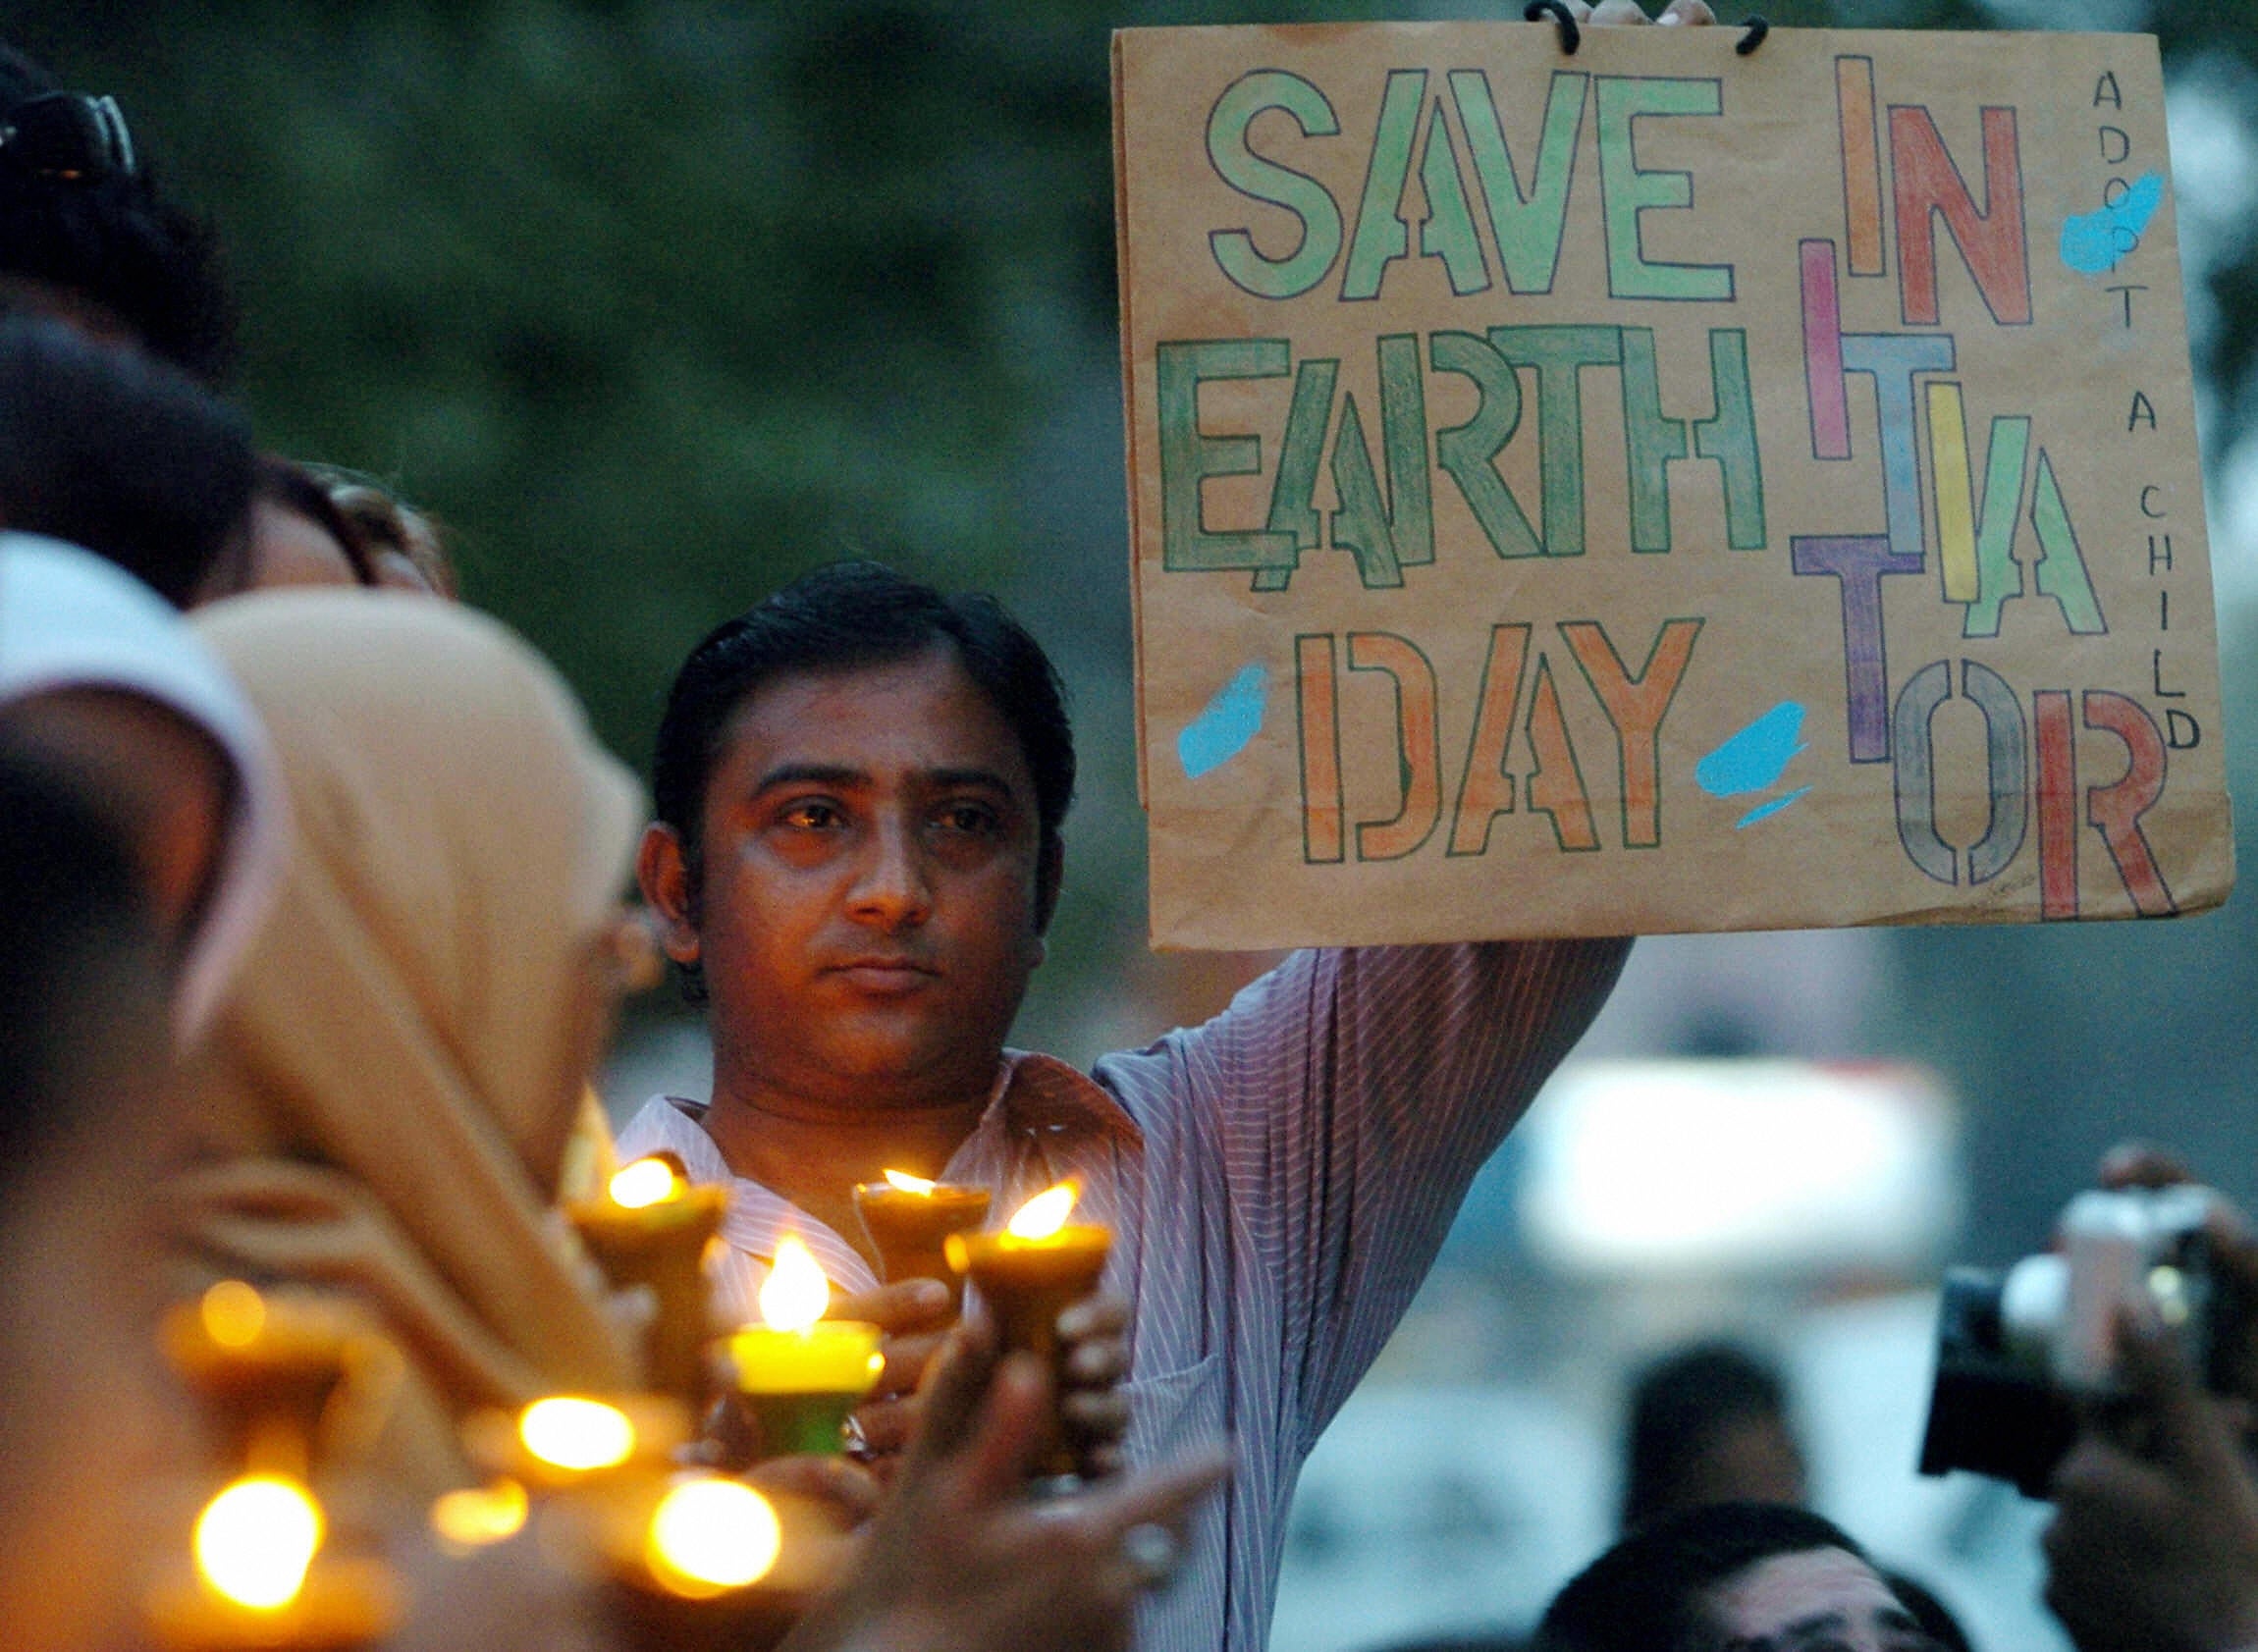 A Pakistani activist displays a placard as others hold candles during a demonstration to mark International Earth Day in Karachi, 21 April, 2005. (AAMIR QURESHI/AFP via Getty Images)